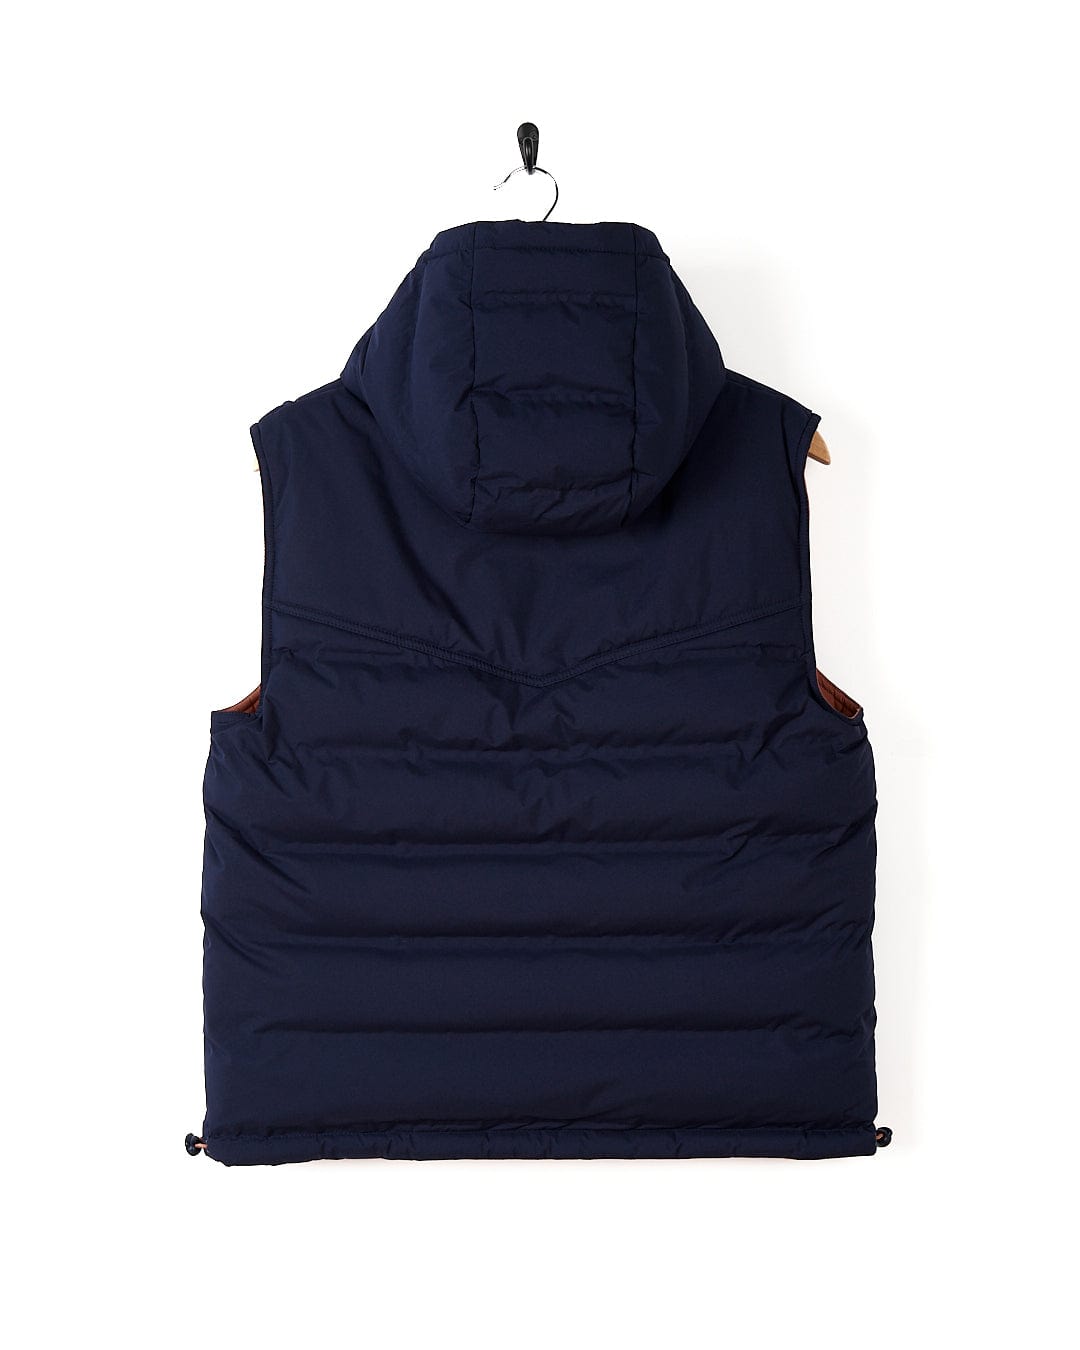 A Astra - Womens Reversible Padded Gilet - Blue/Pink Saltrock jacket with a detachable hood hanging on a white wall.